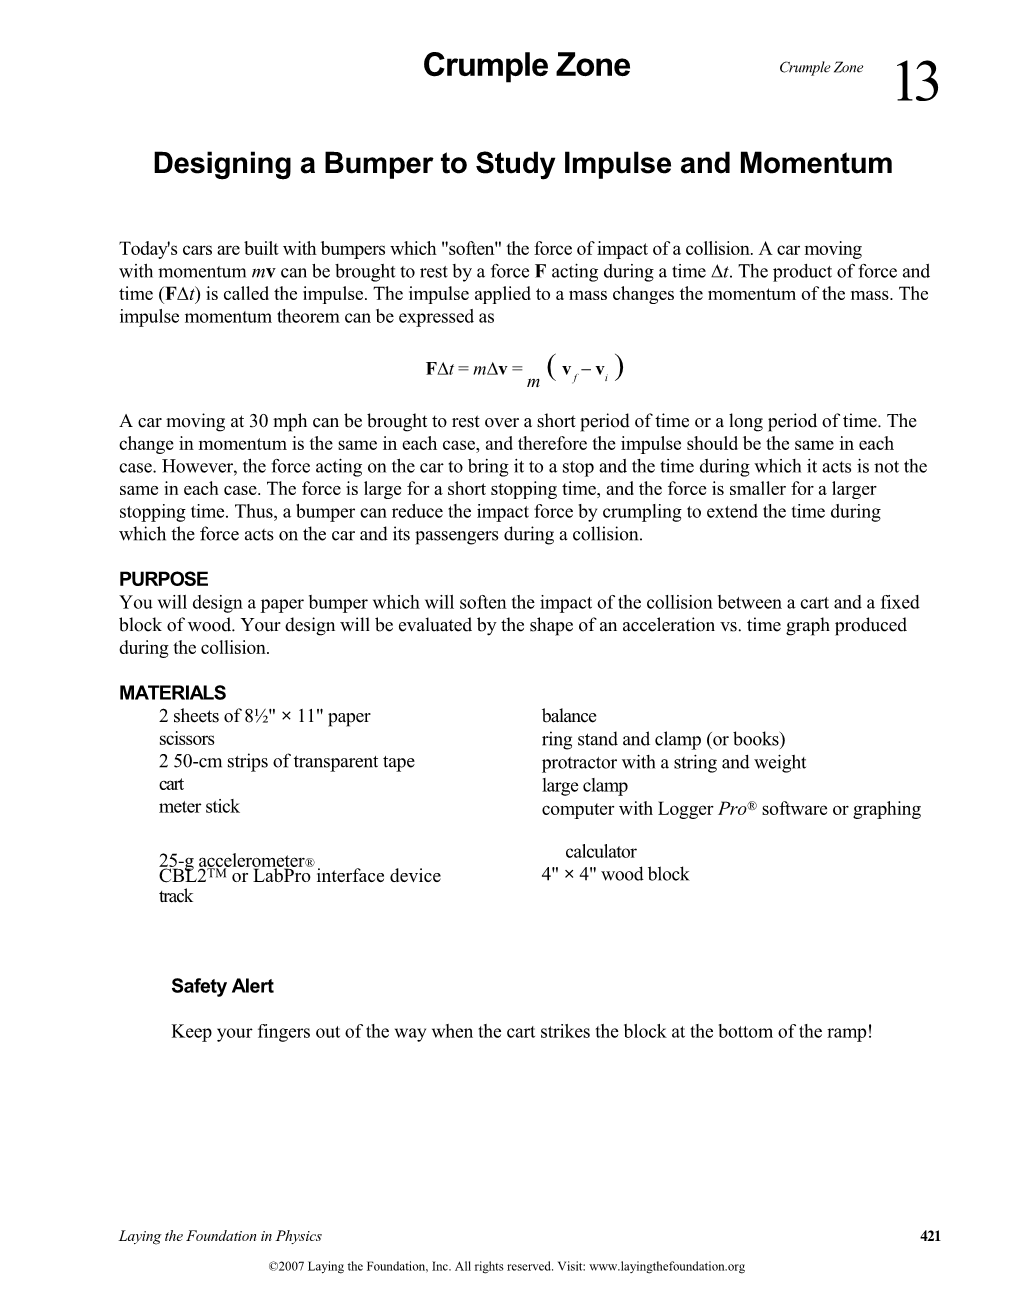 Designing a Bumper to Study Impulse and Momentum